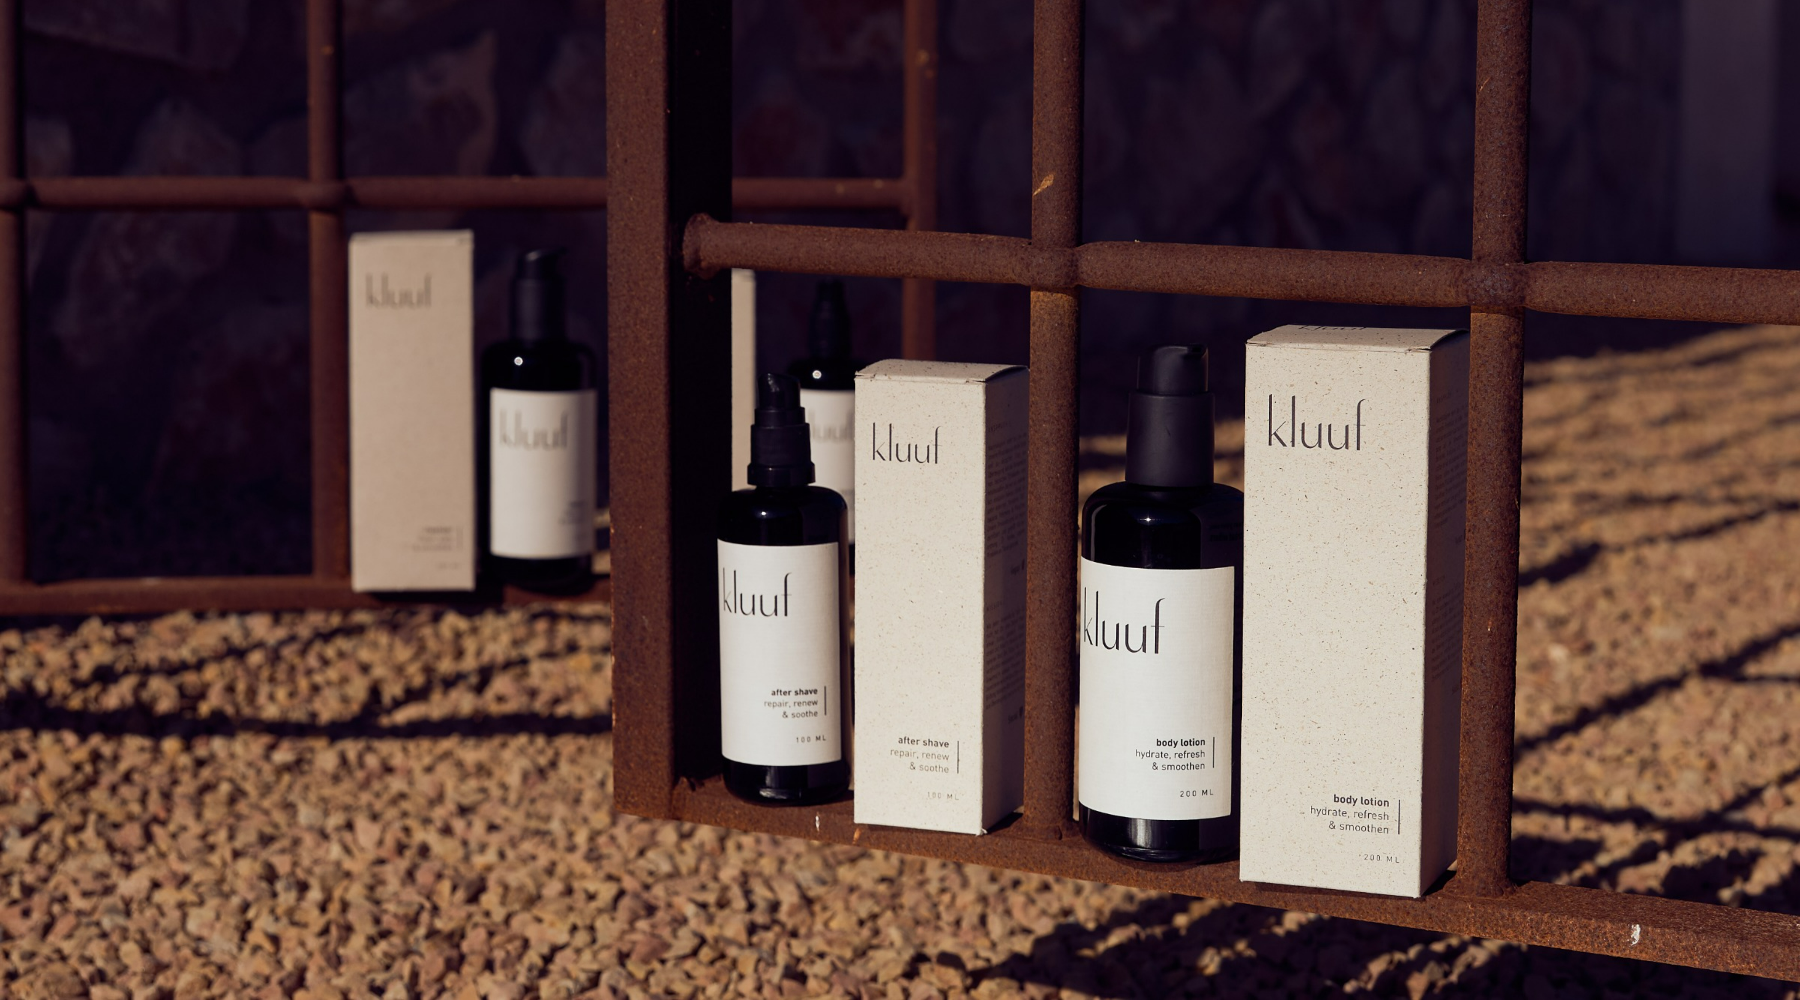 kluuf's entire vegan and sustainable skincare product collection for men